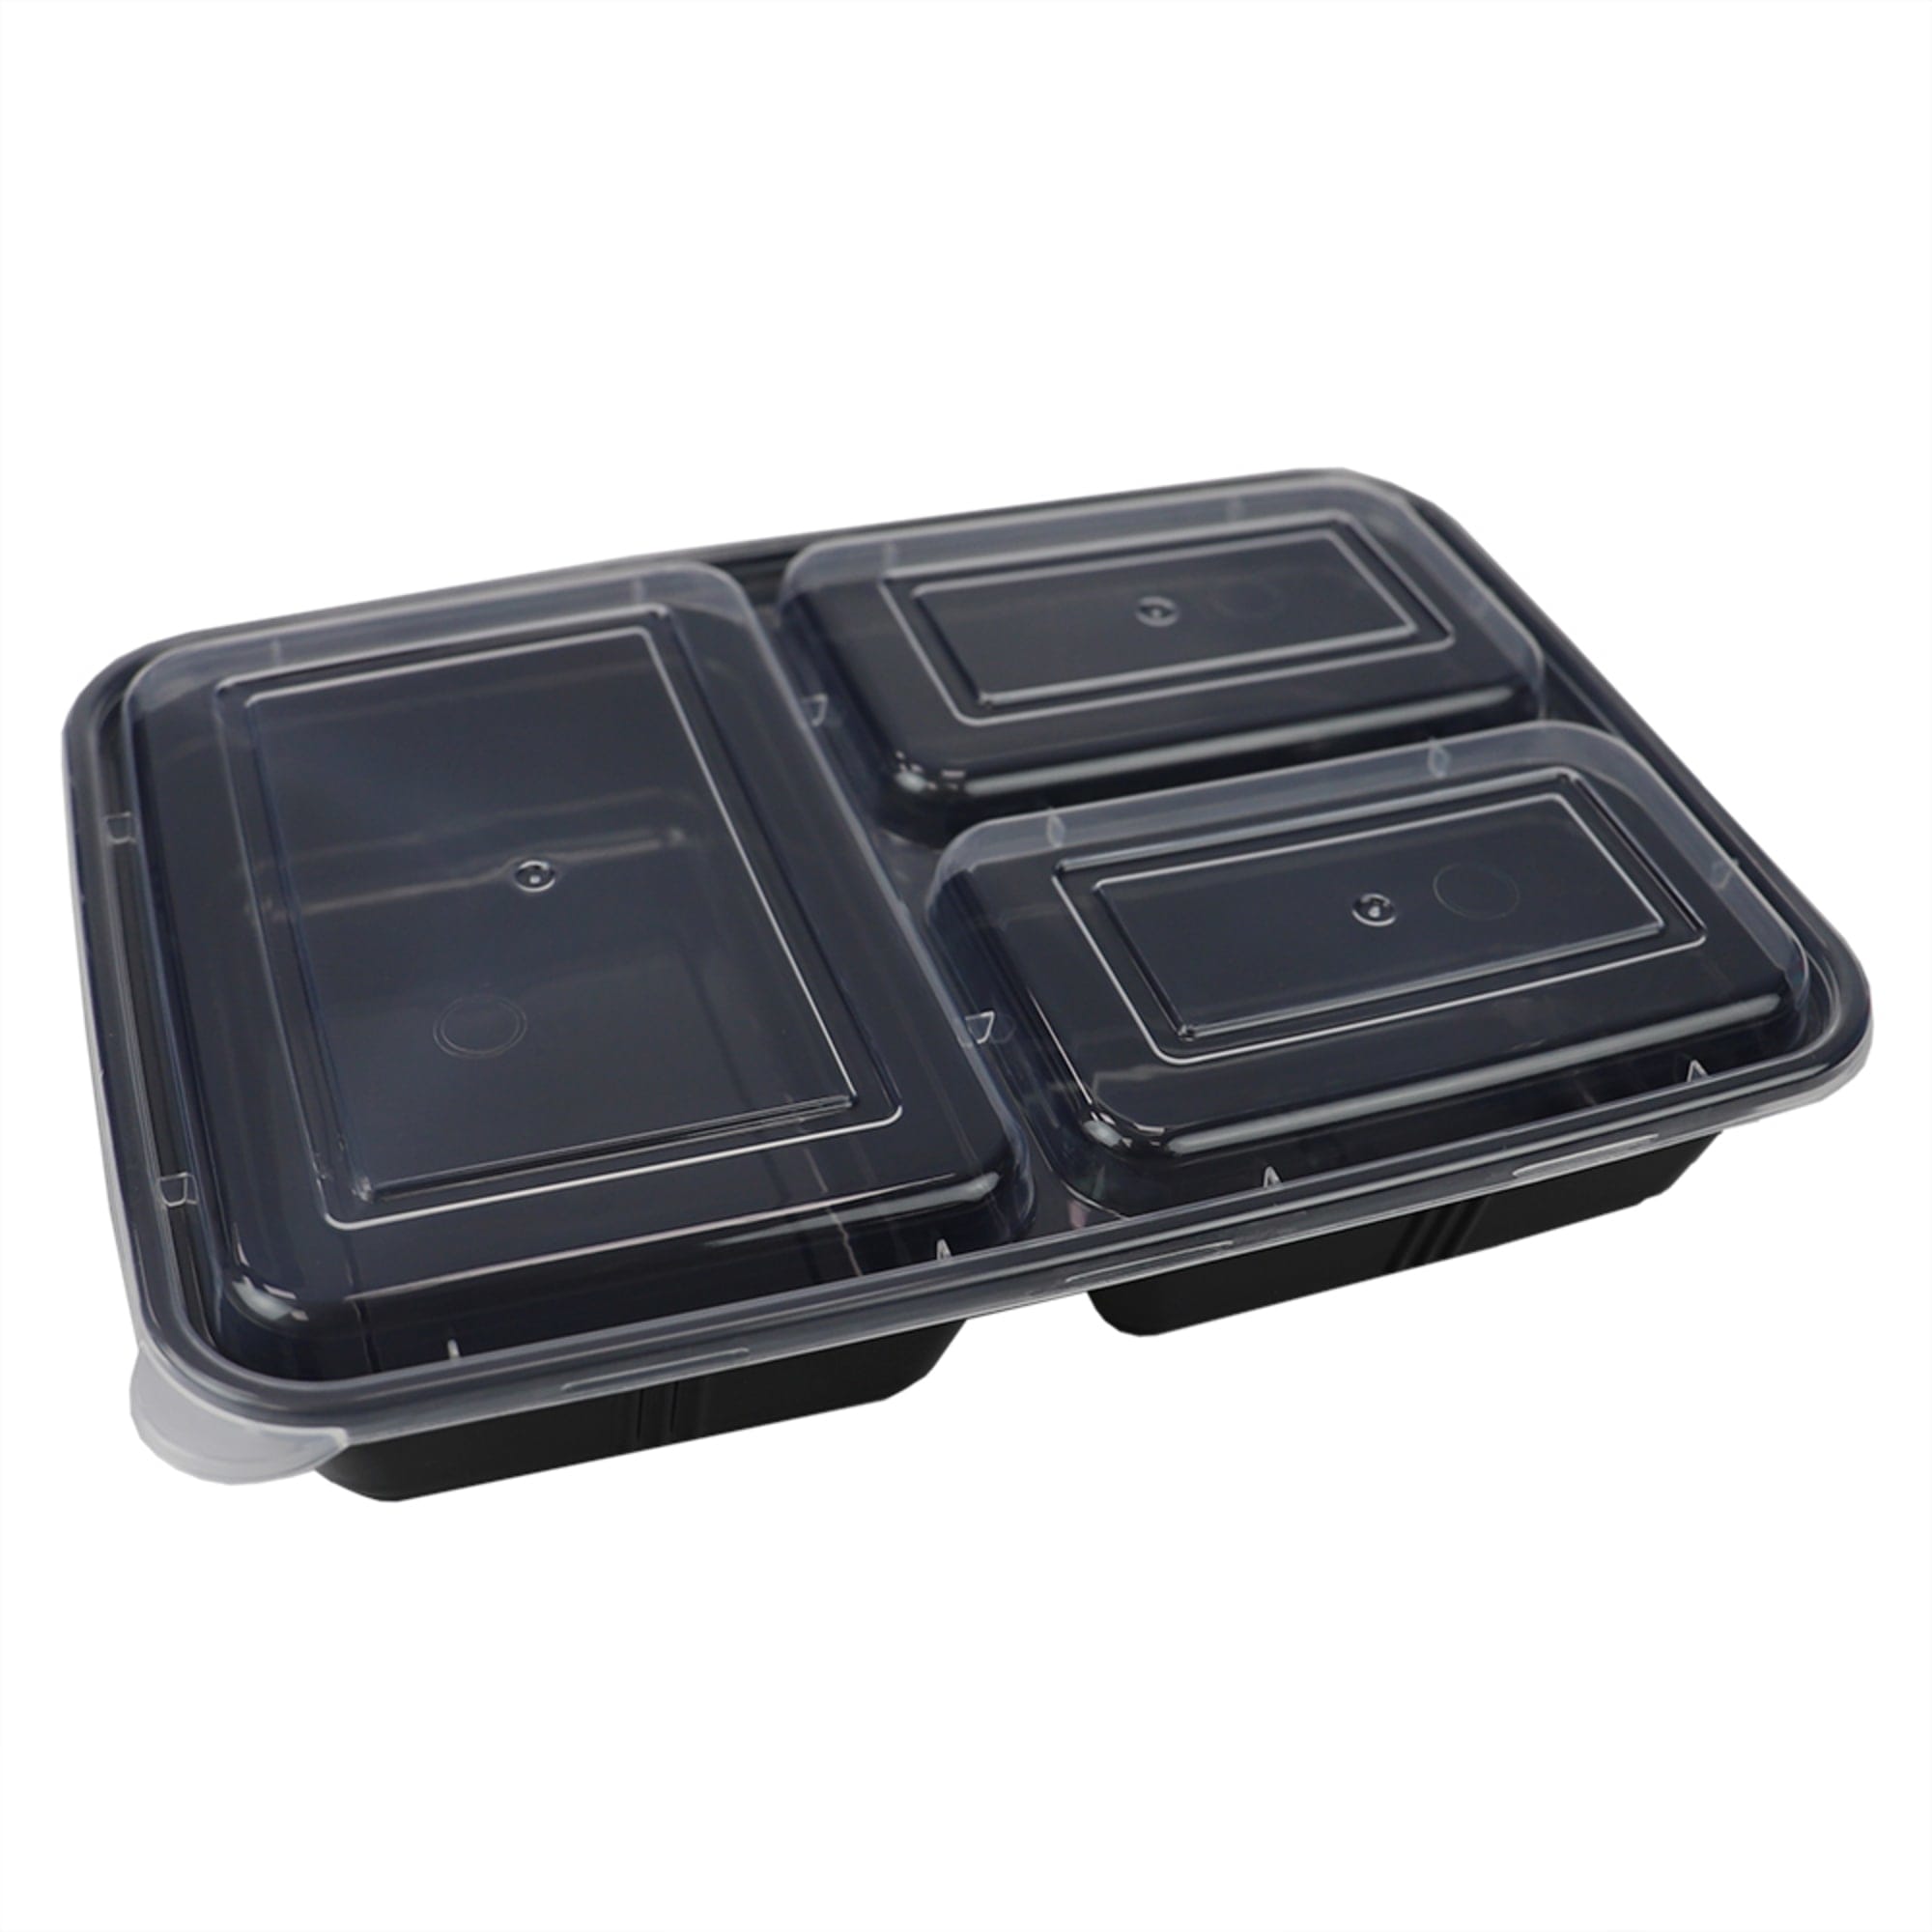 Home Basic 10 Piece 3 Compartment BPA-Free Plastic Meal Prep Containers, Black $4.00 EACH, CASE PACK OF 12